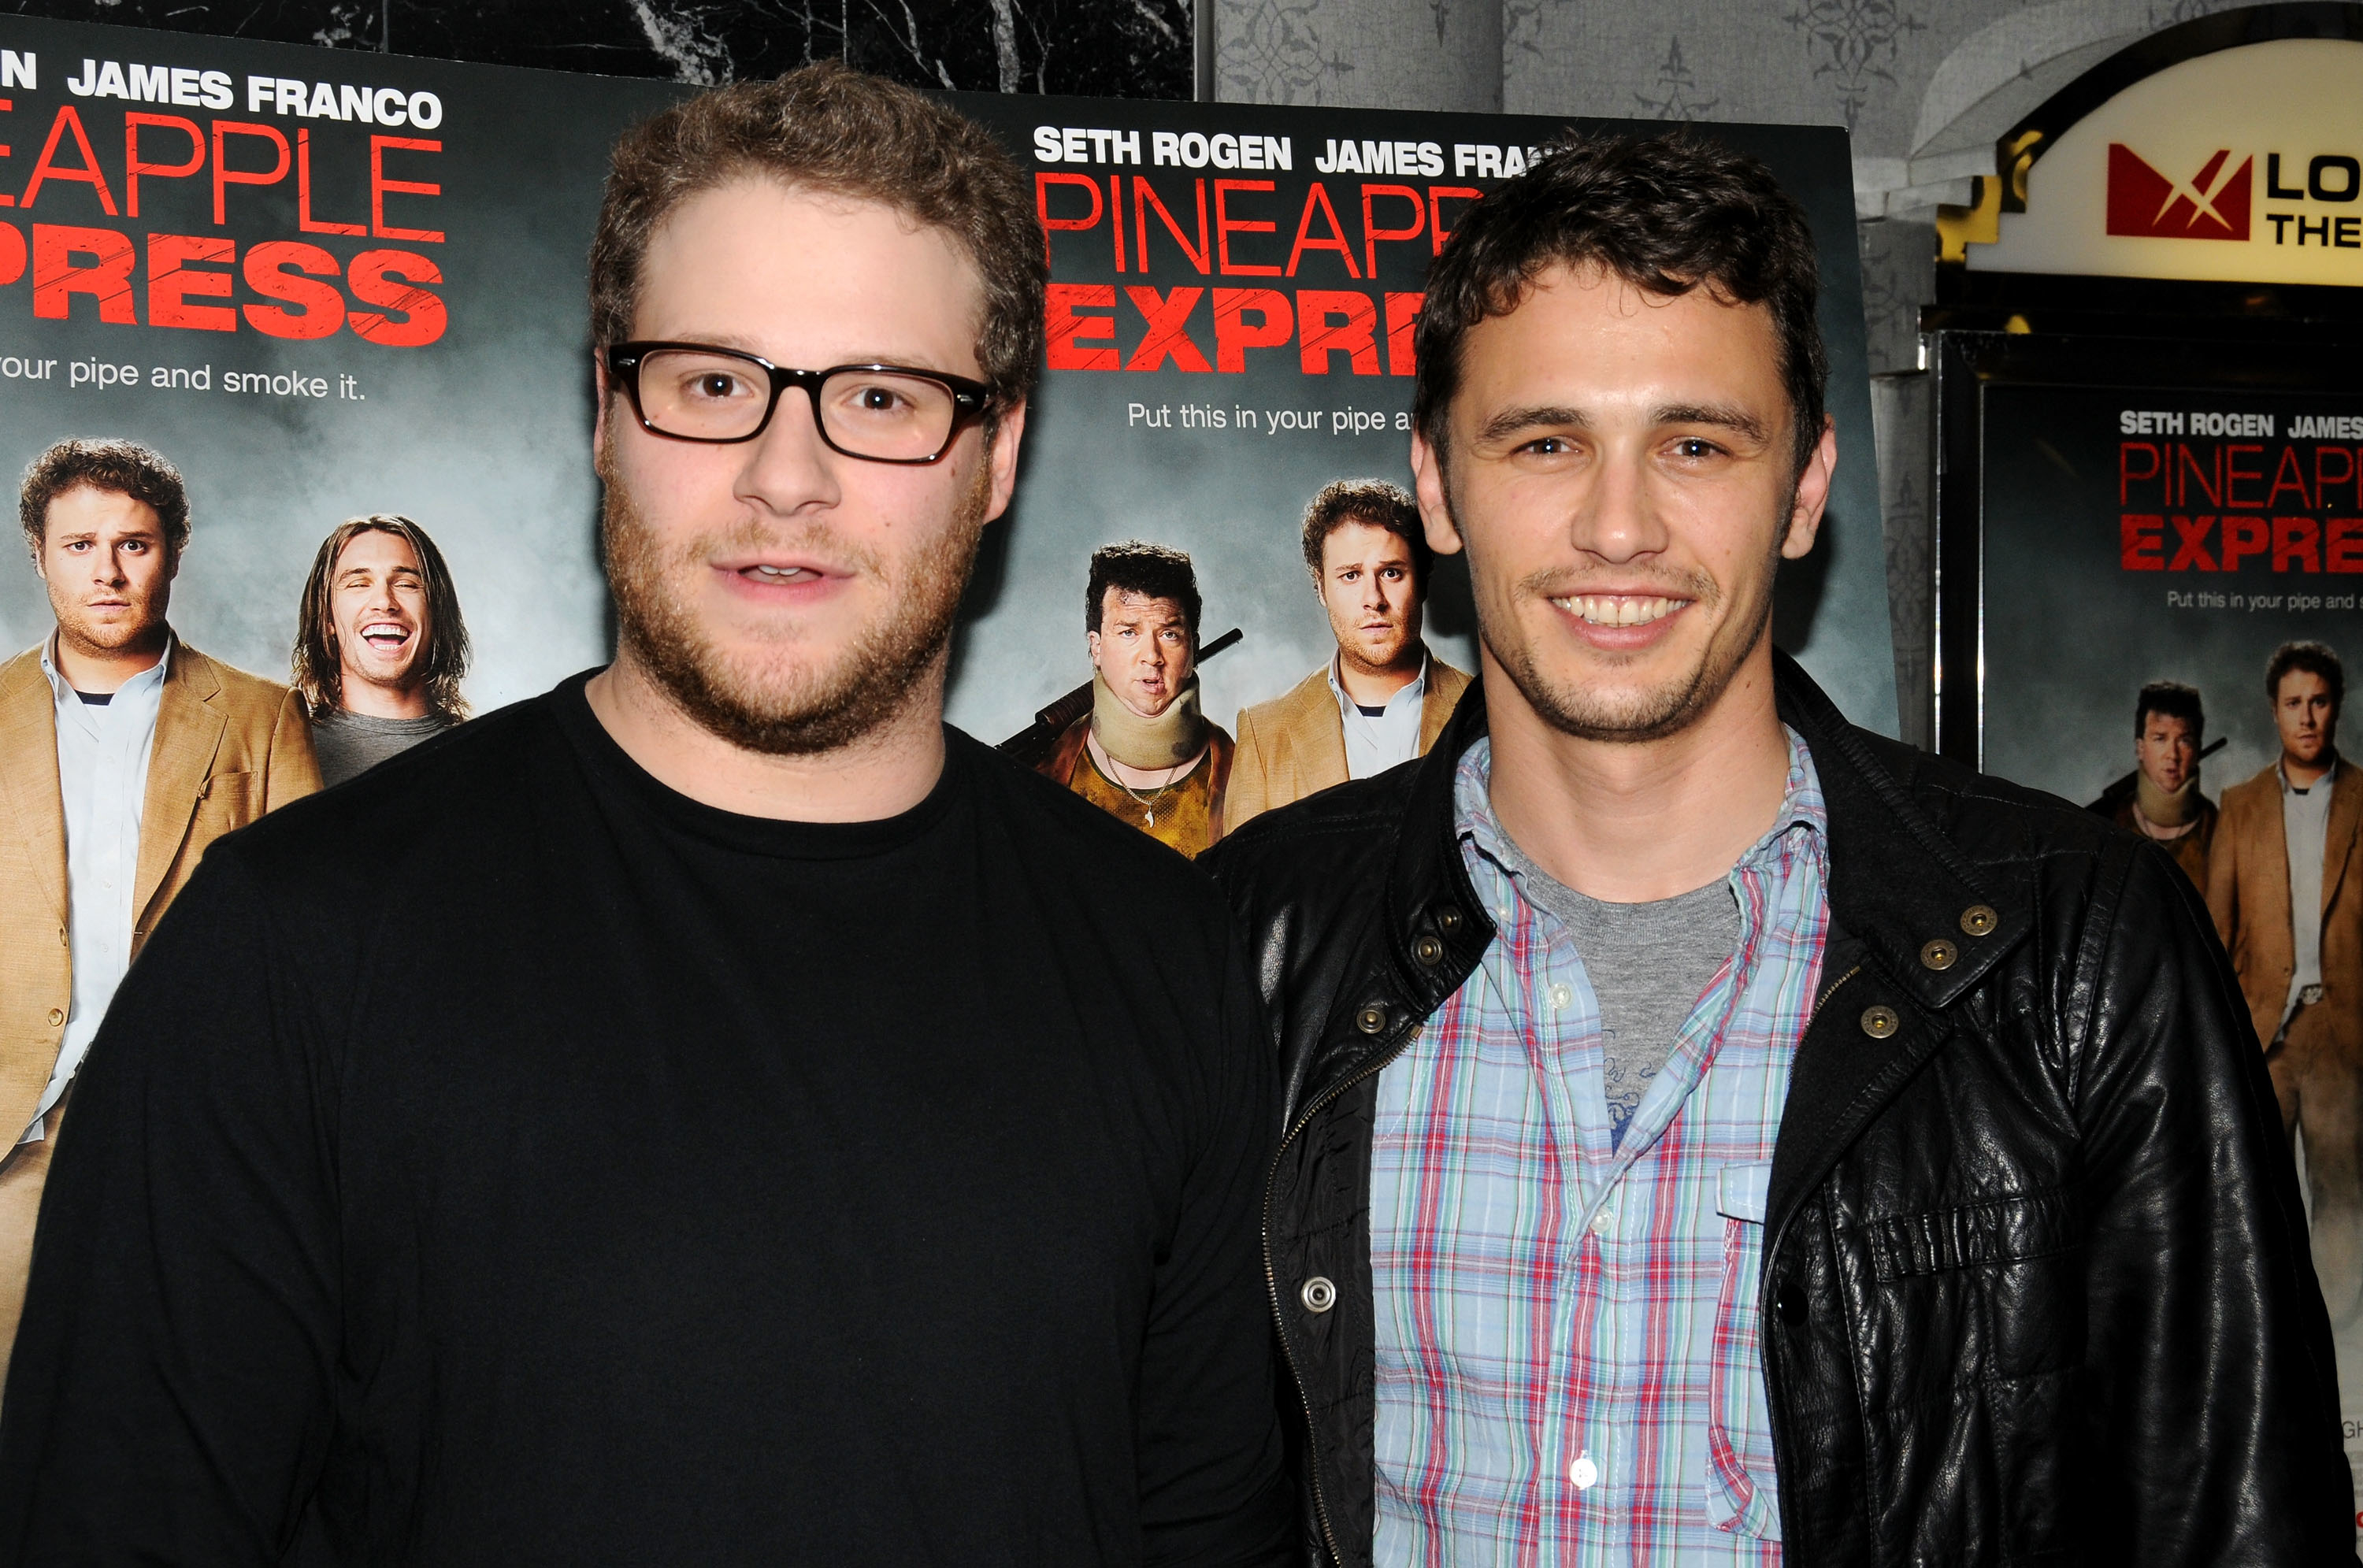 Seth Rogen and James Franco standing together at the &quot;Pineapple Express&quot; premiere